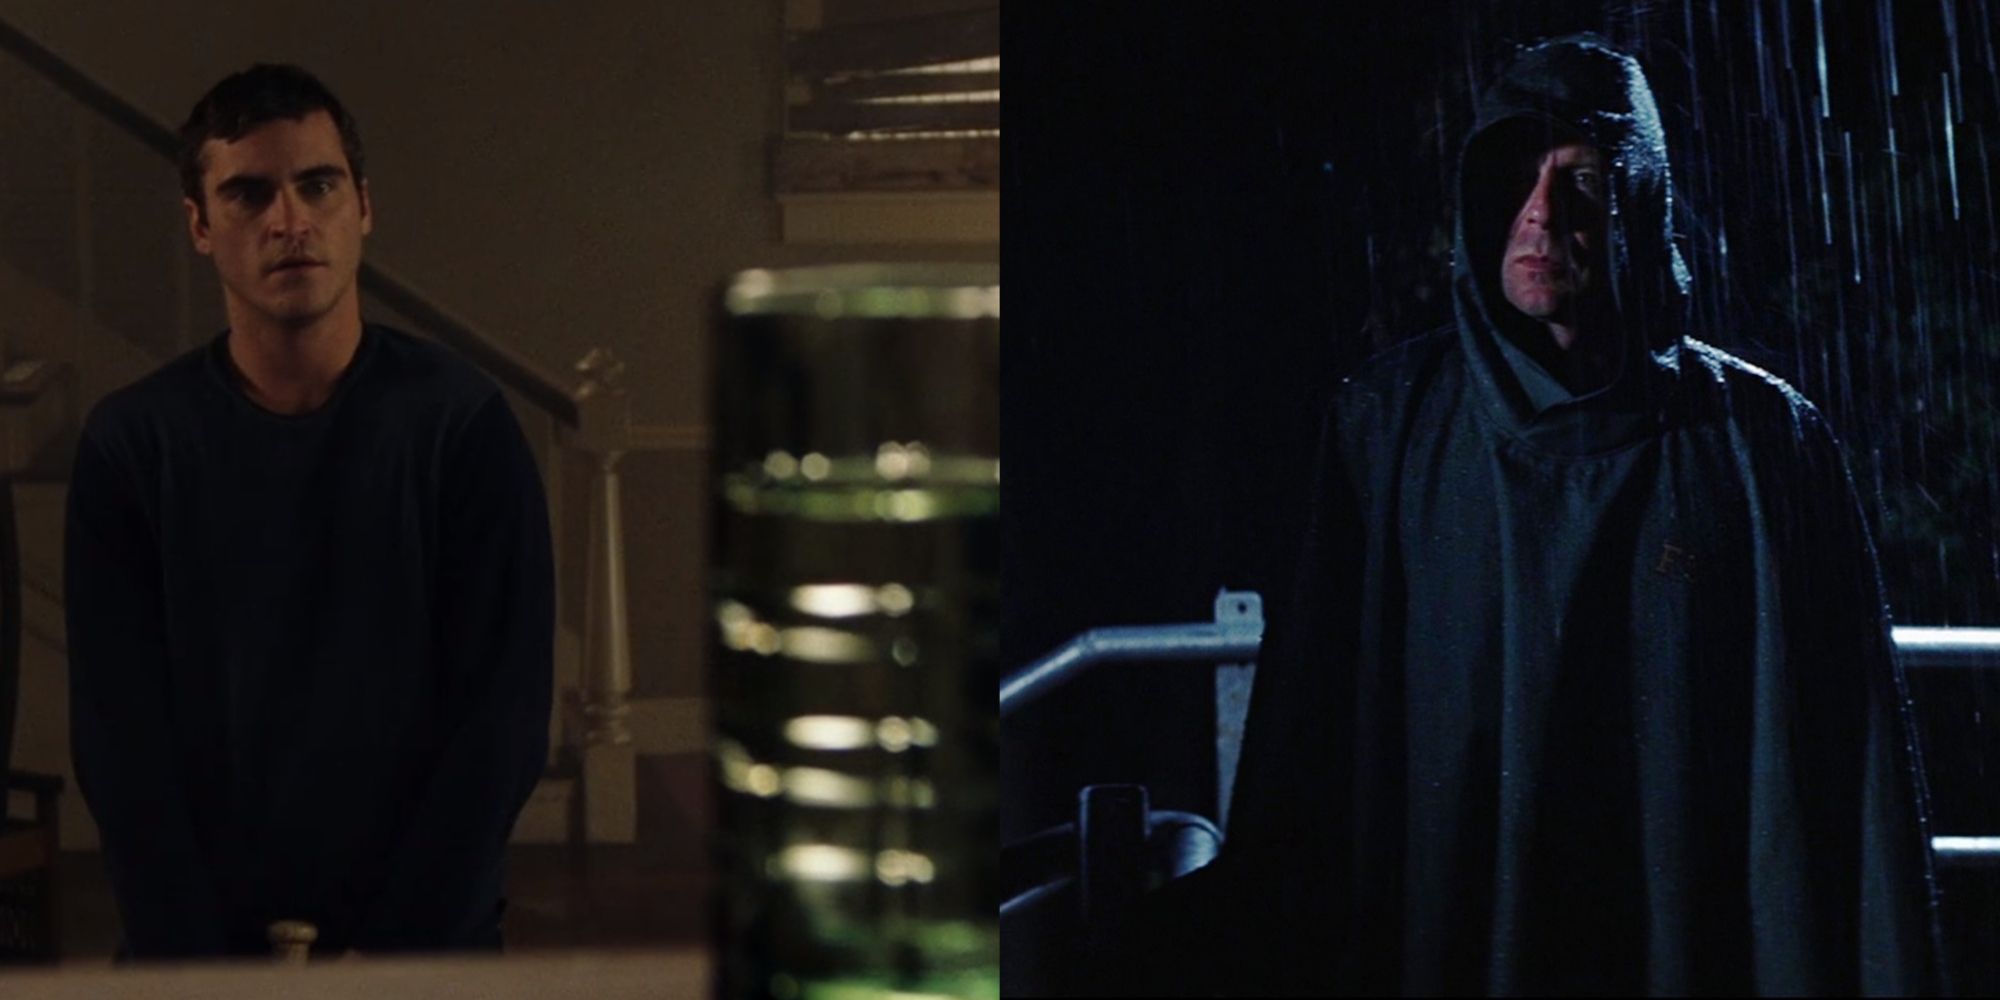 Split image of Merrill looking at a glass of water in Signs (2002) and David Dunn AKA Overseer standing in the rain in Unbreakable (2000)